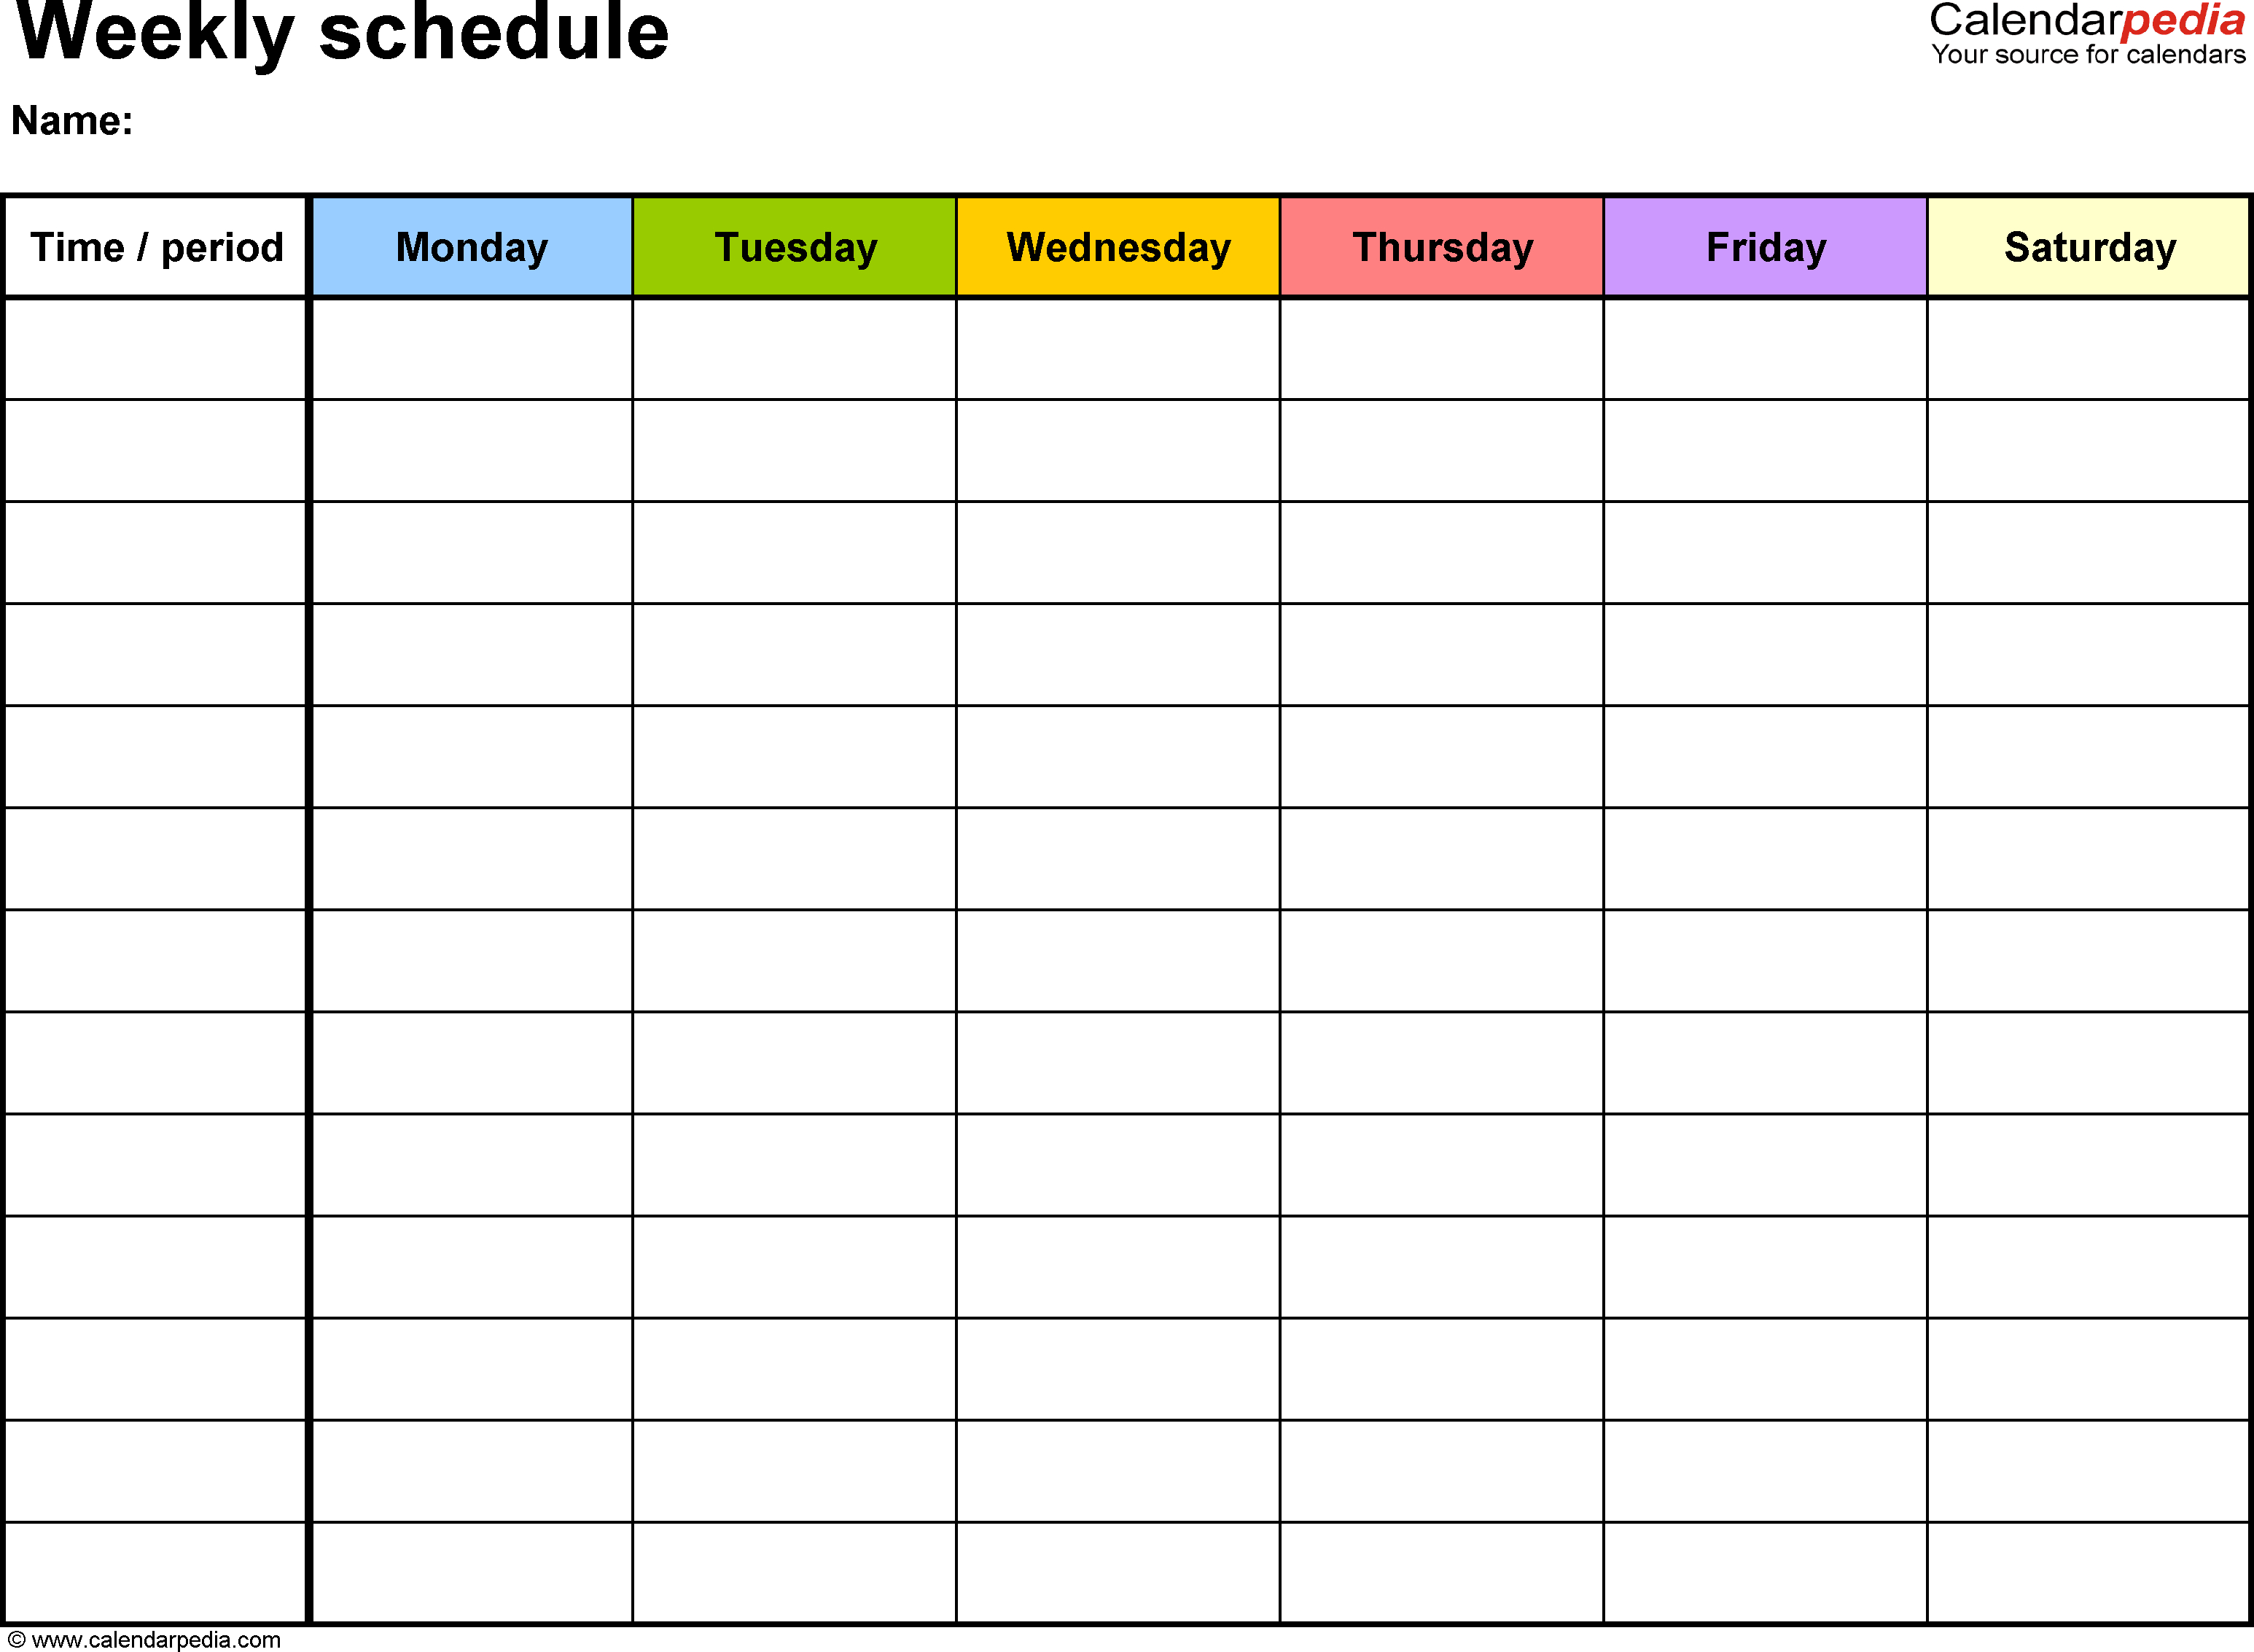 Free Weekly Schedule Templates For Word  18 Templates intended for 5 Day Weekly Calendar